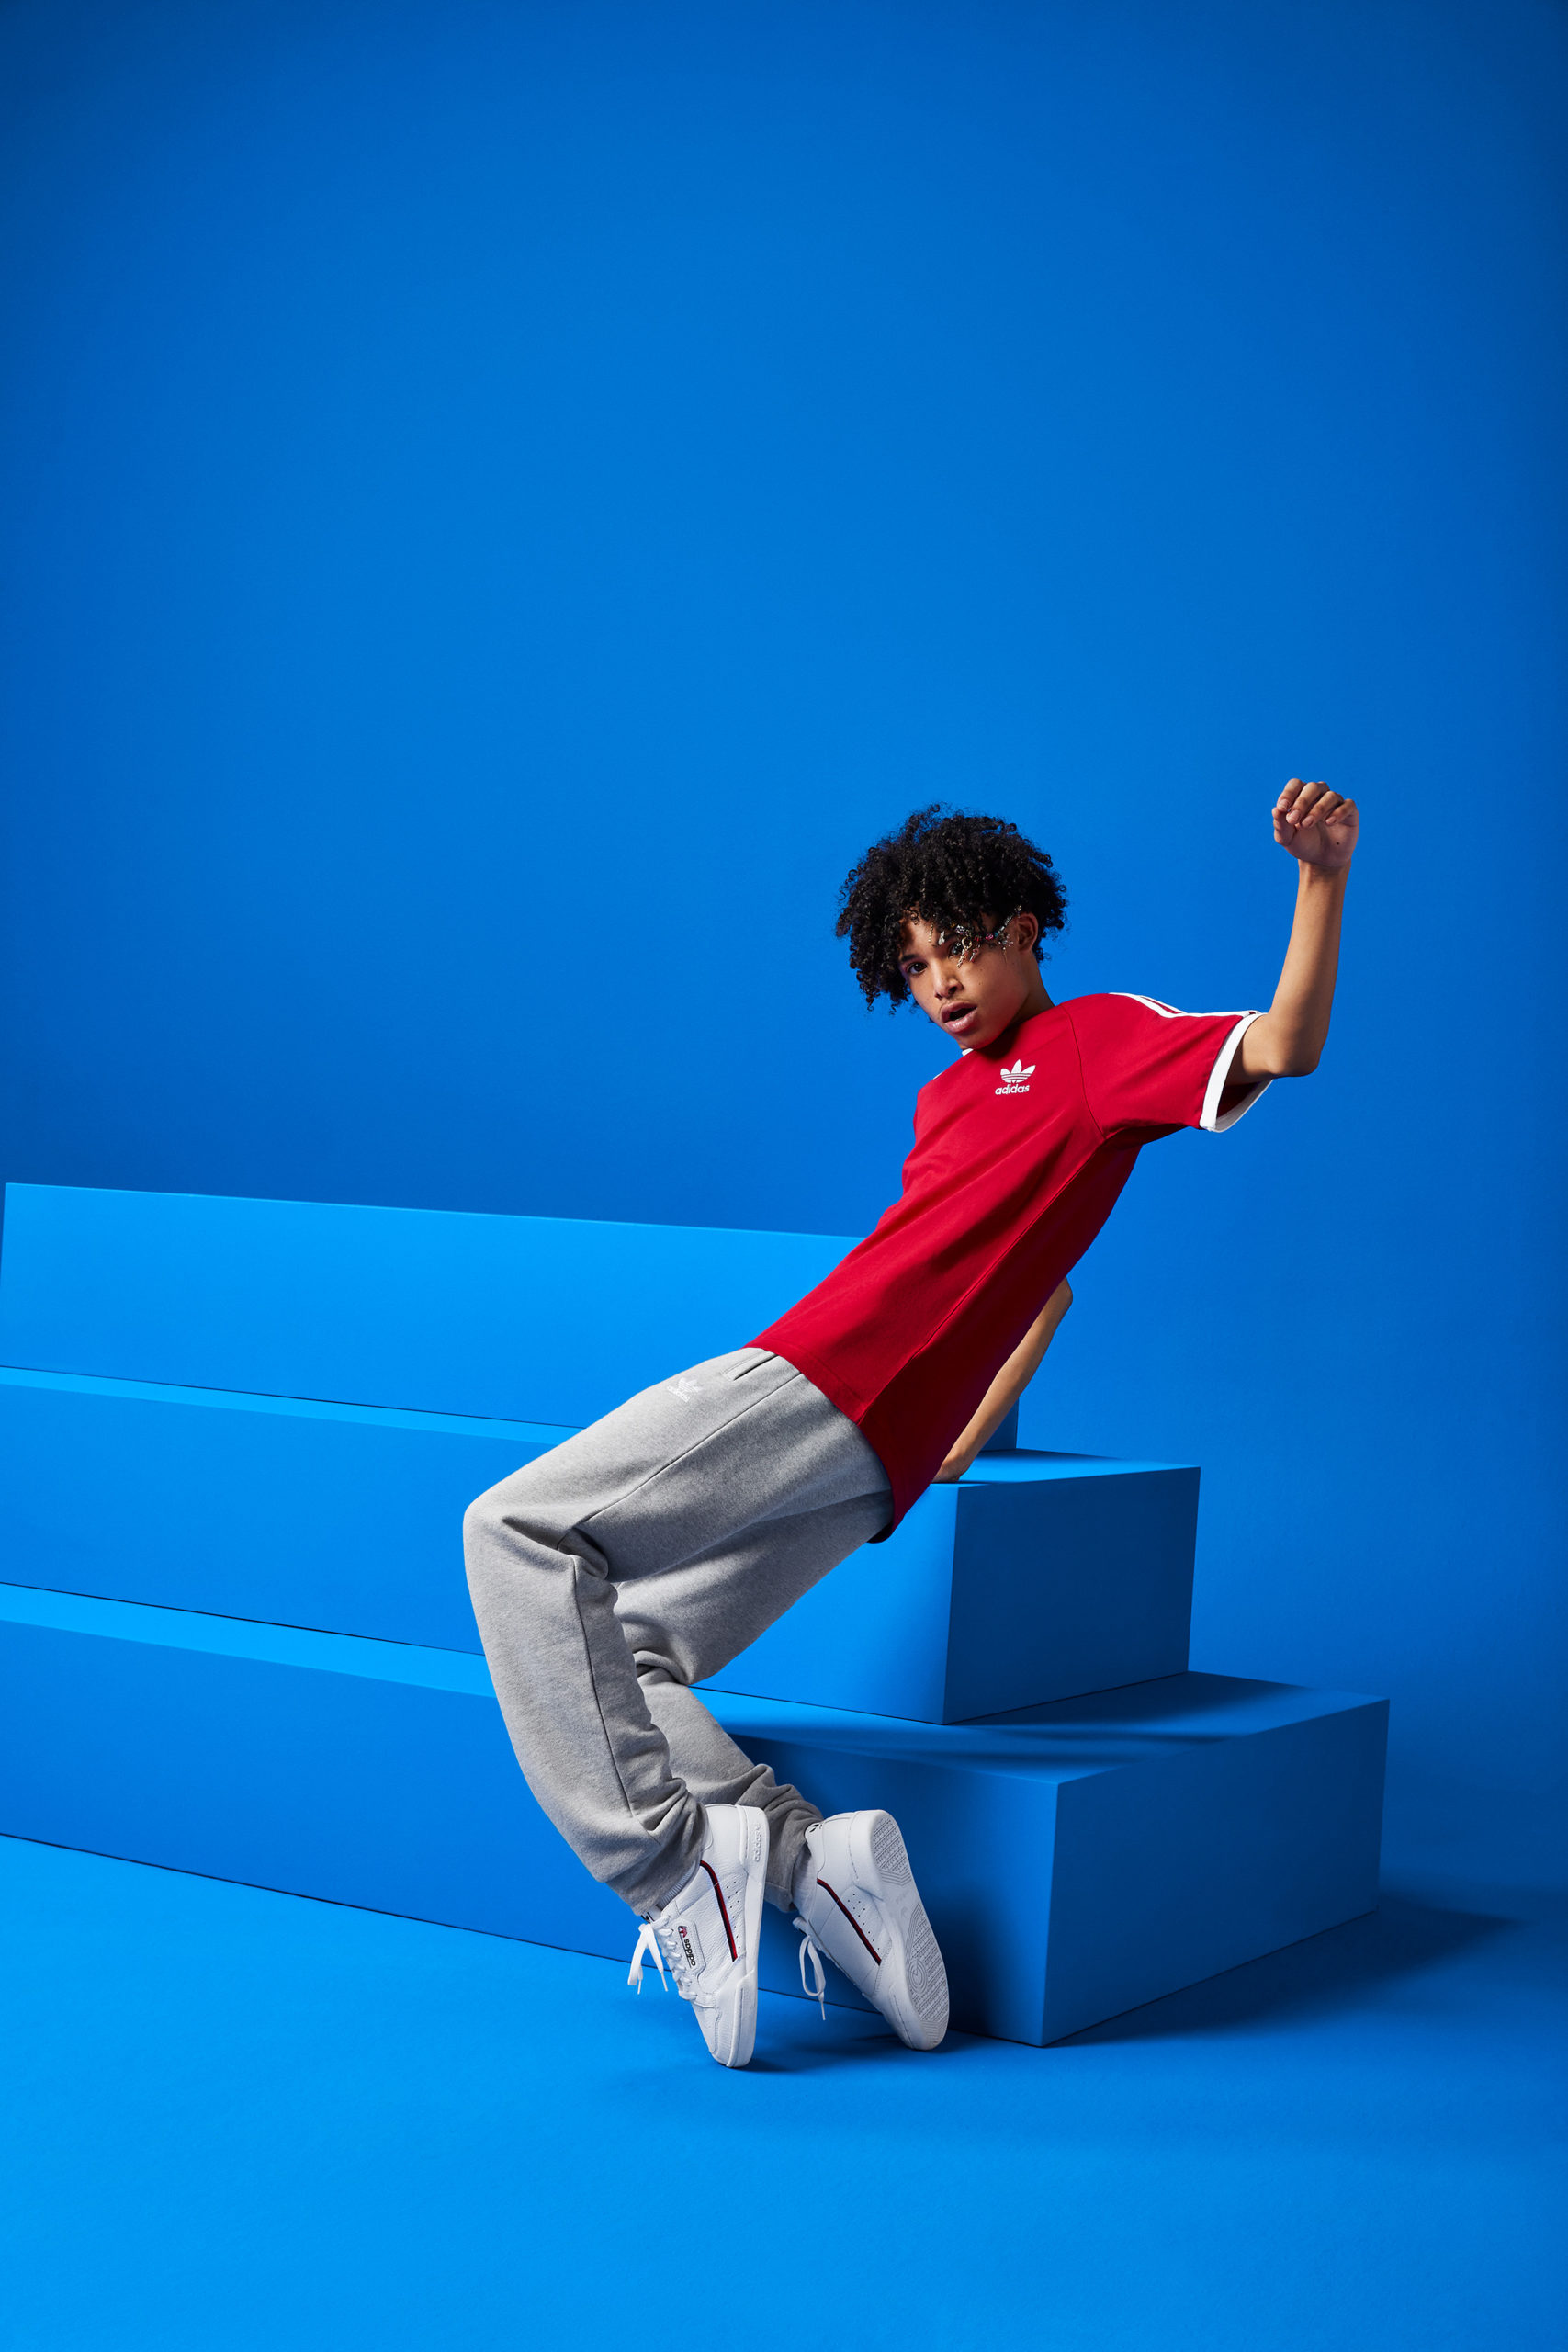 A guy wearing a red shirt dances in front of a blue set with a stack of stair-stepped boxes.